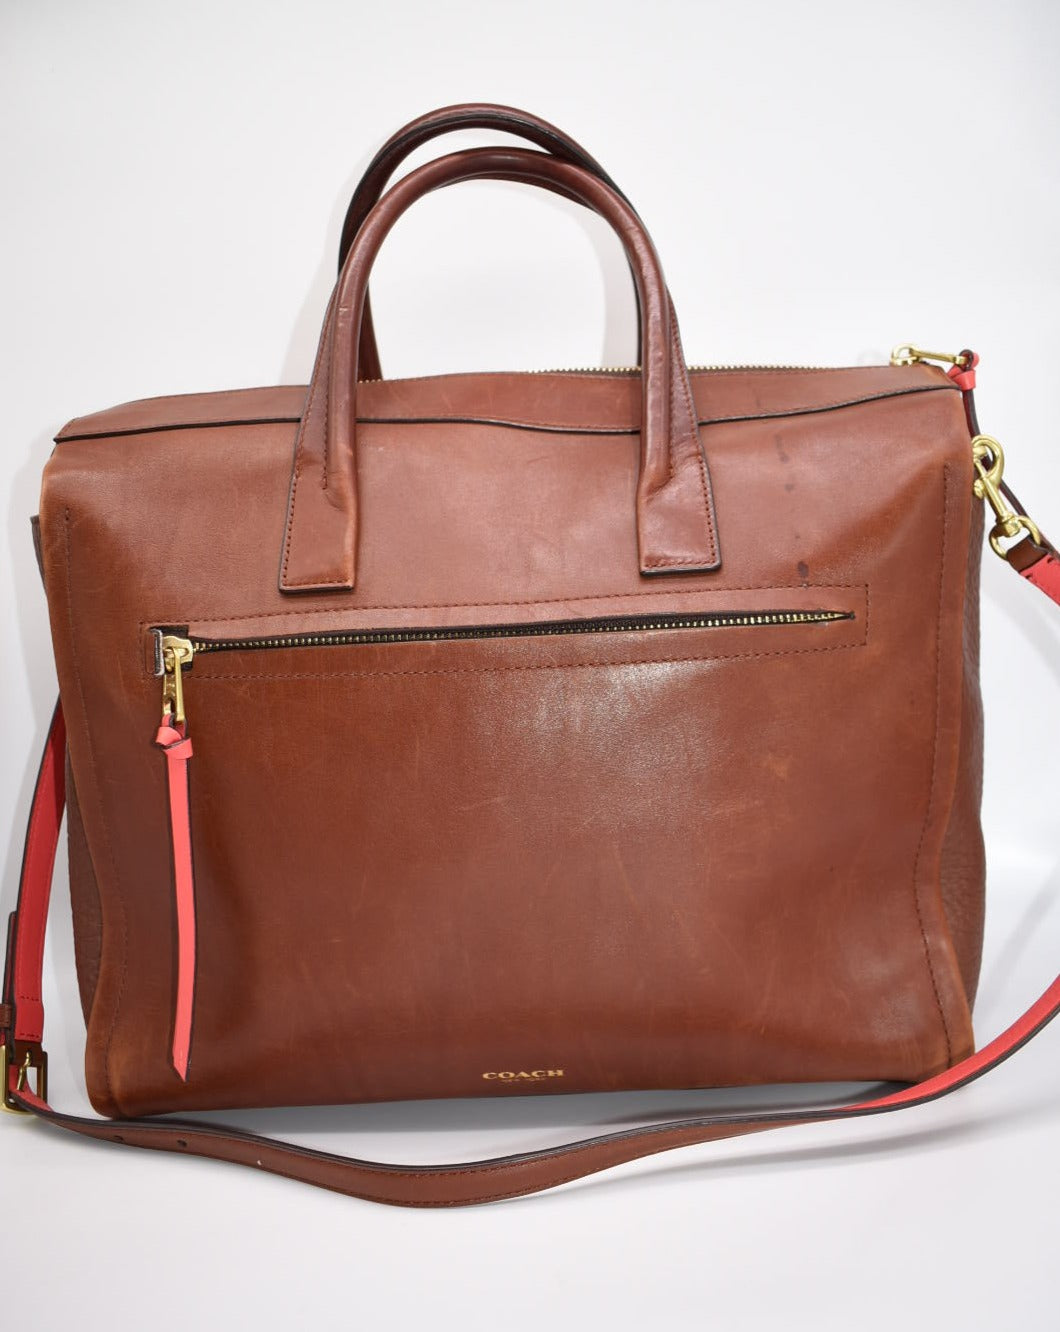 Coach Bleecker Riley Carryall Tote Bag in Chestnut Brown